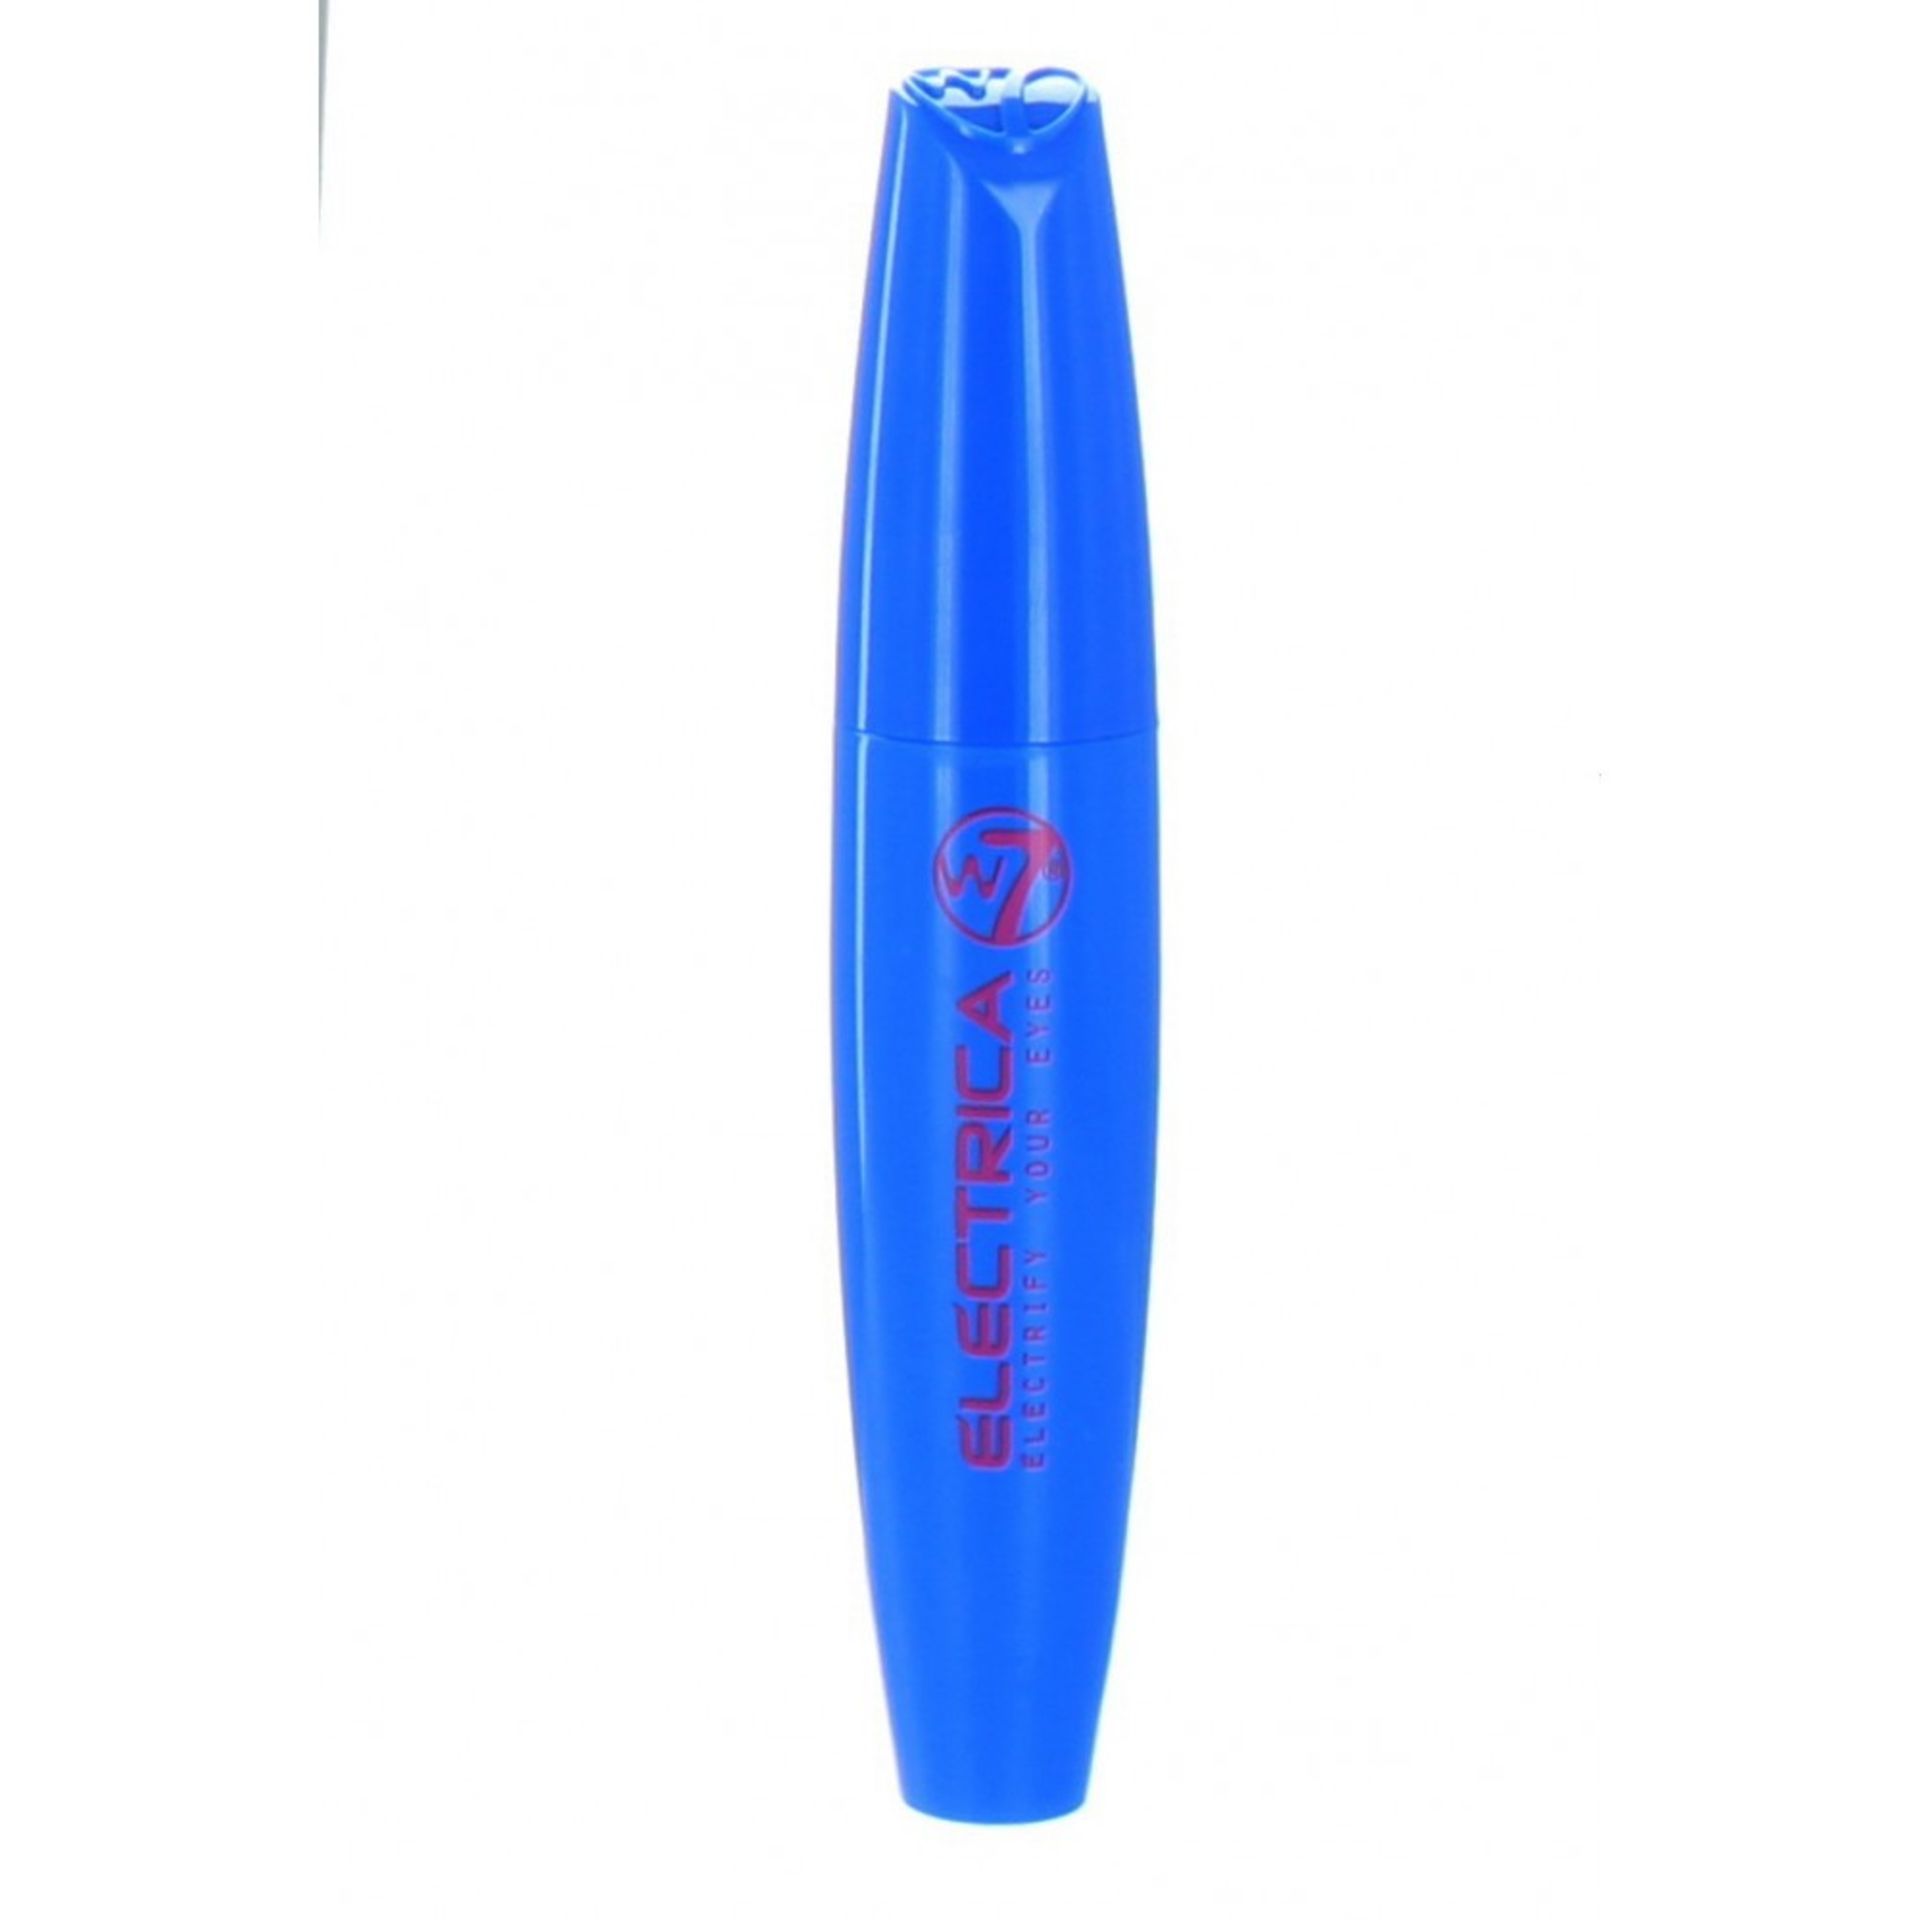 288 w7 Electrica Mascara – in Retail Displays – NO VATUK Delivery £15